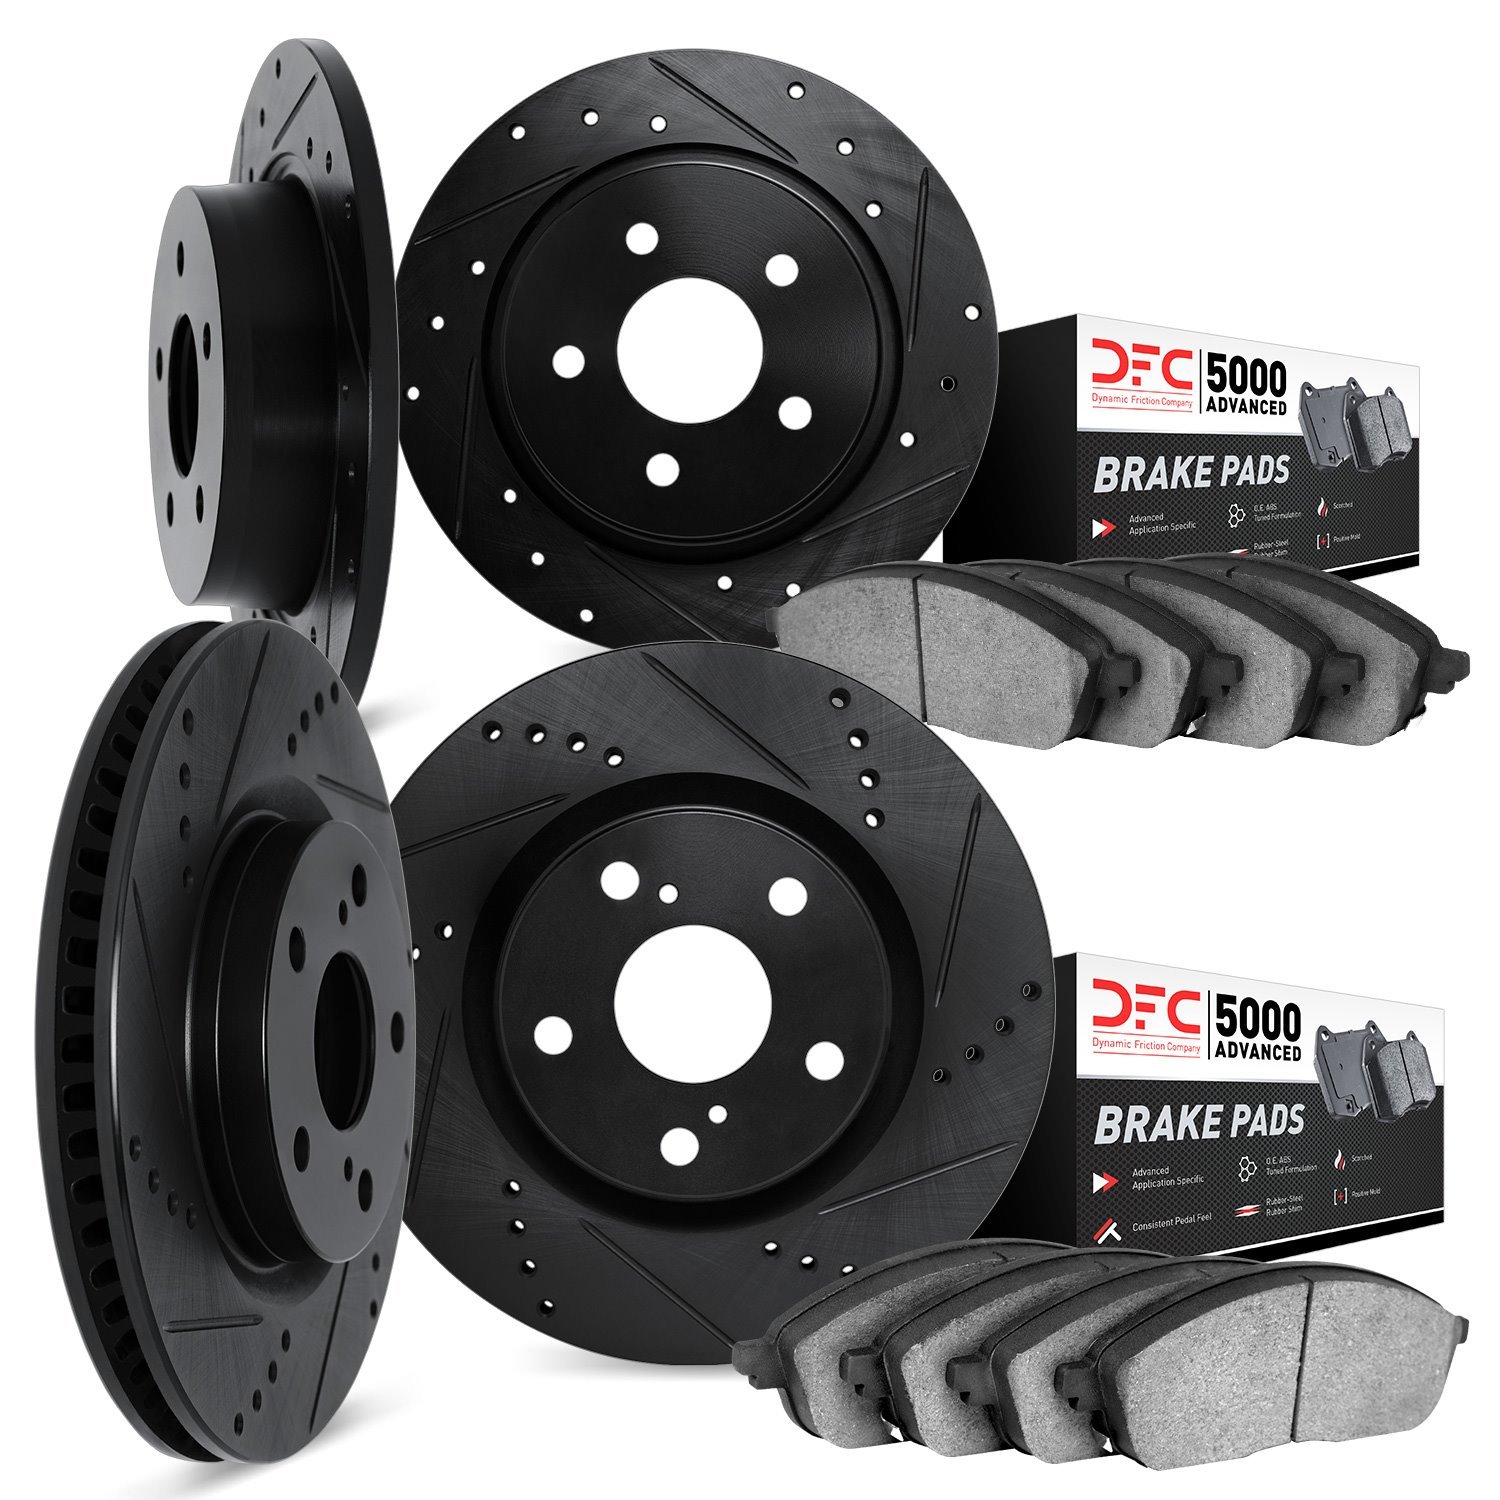 8504-31004 Drilled/Slotted Brake Rotors w/5000 Advanced Brake Pads Kit [Black], 1993-1997 BMW, Position: Front and Rear